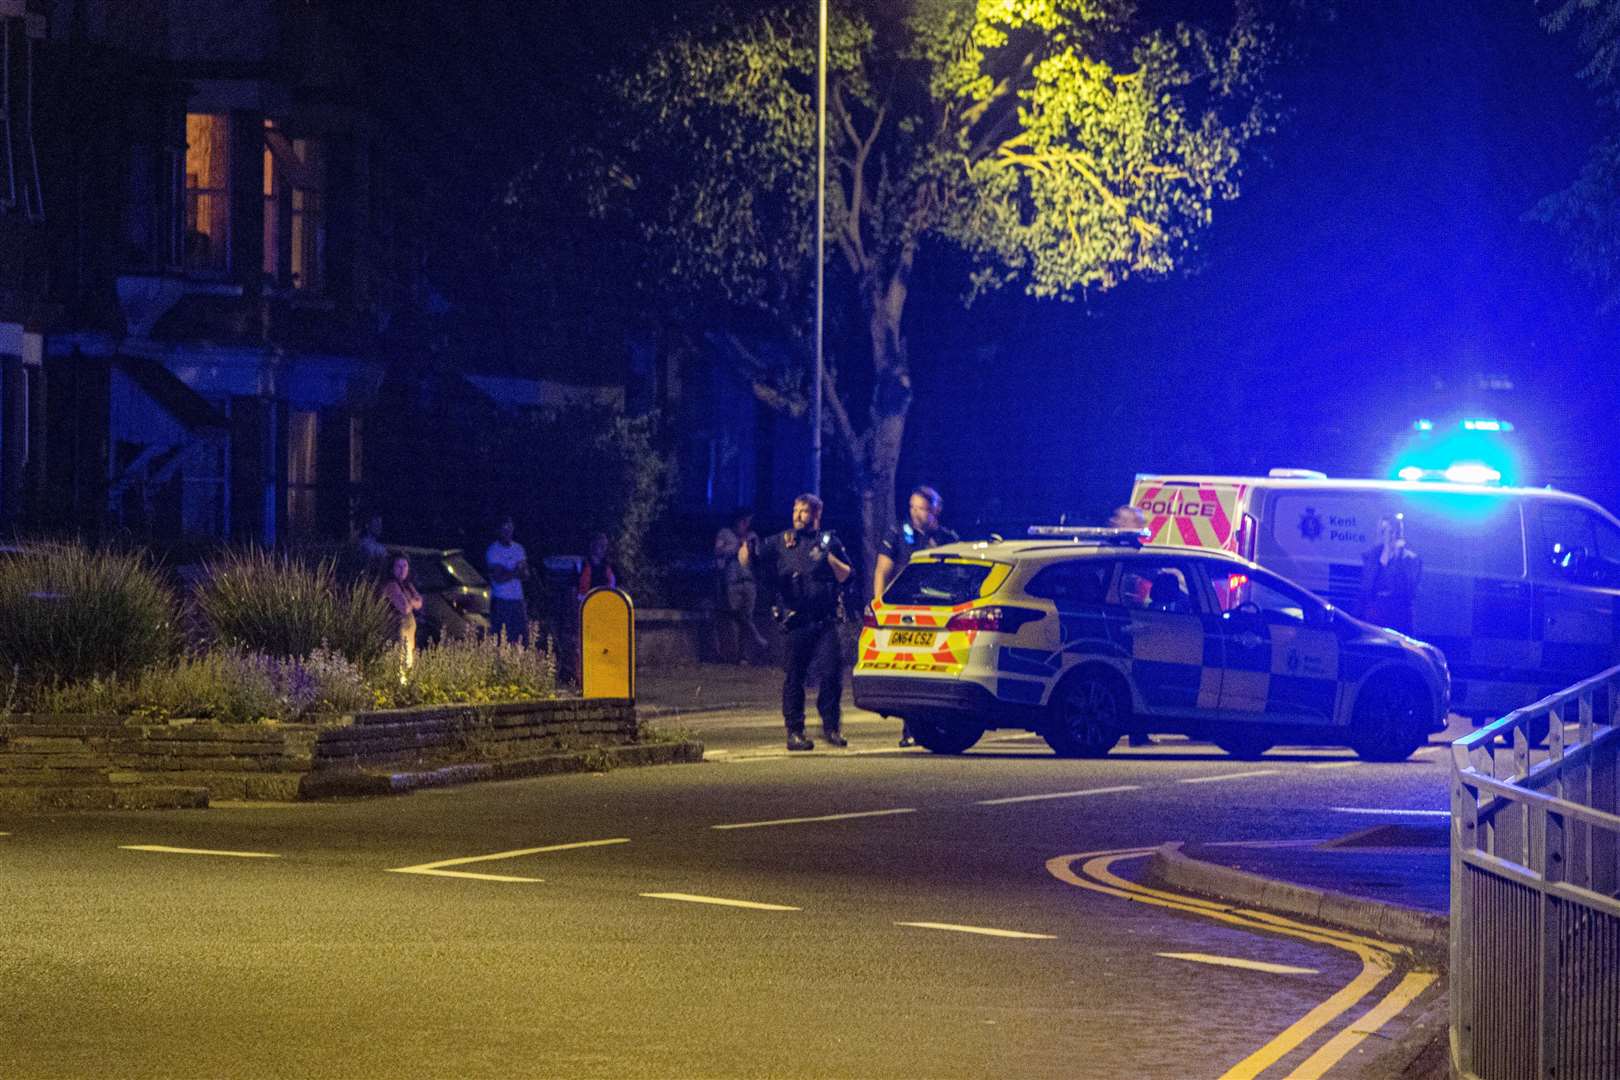 Police were called to Cheriton Road in Folkestone on Monday night. Photo: Sam Ceasar